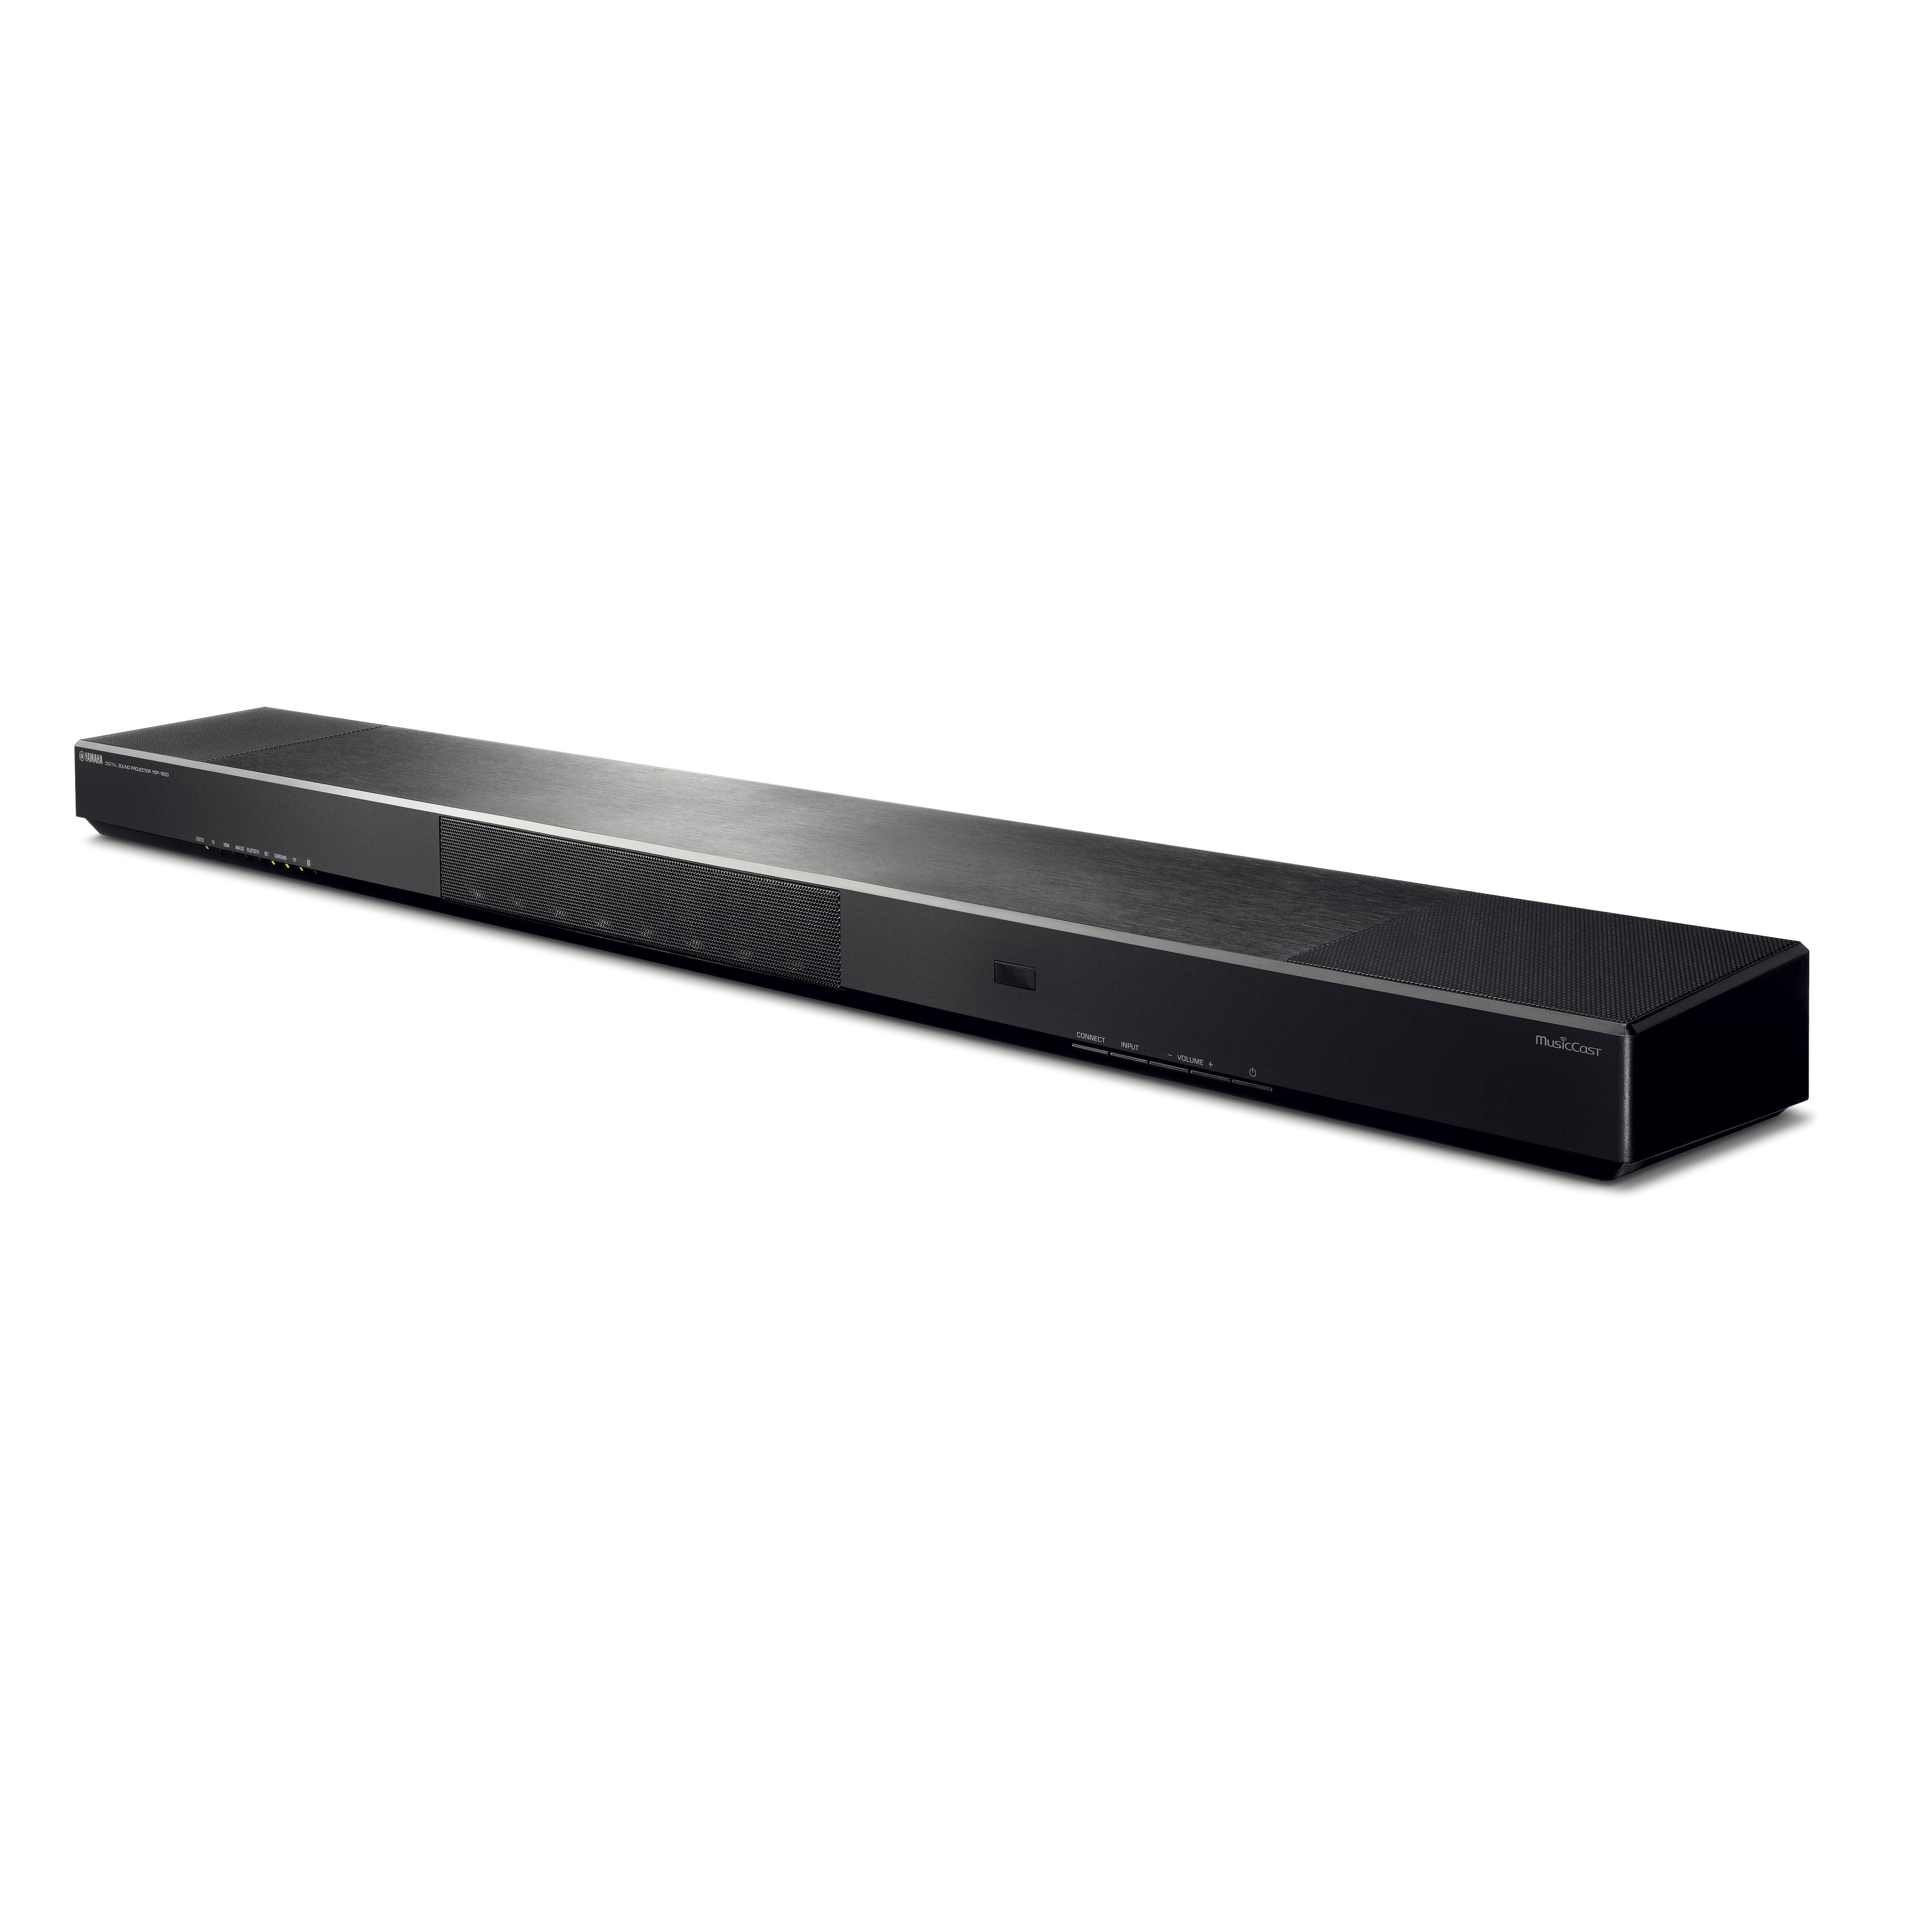 YSP-1600 - Overview - Sound Bar - Products - Yamaha - Malaysia